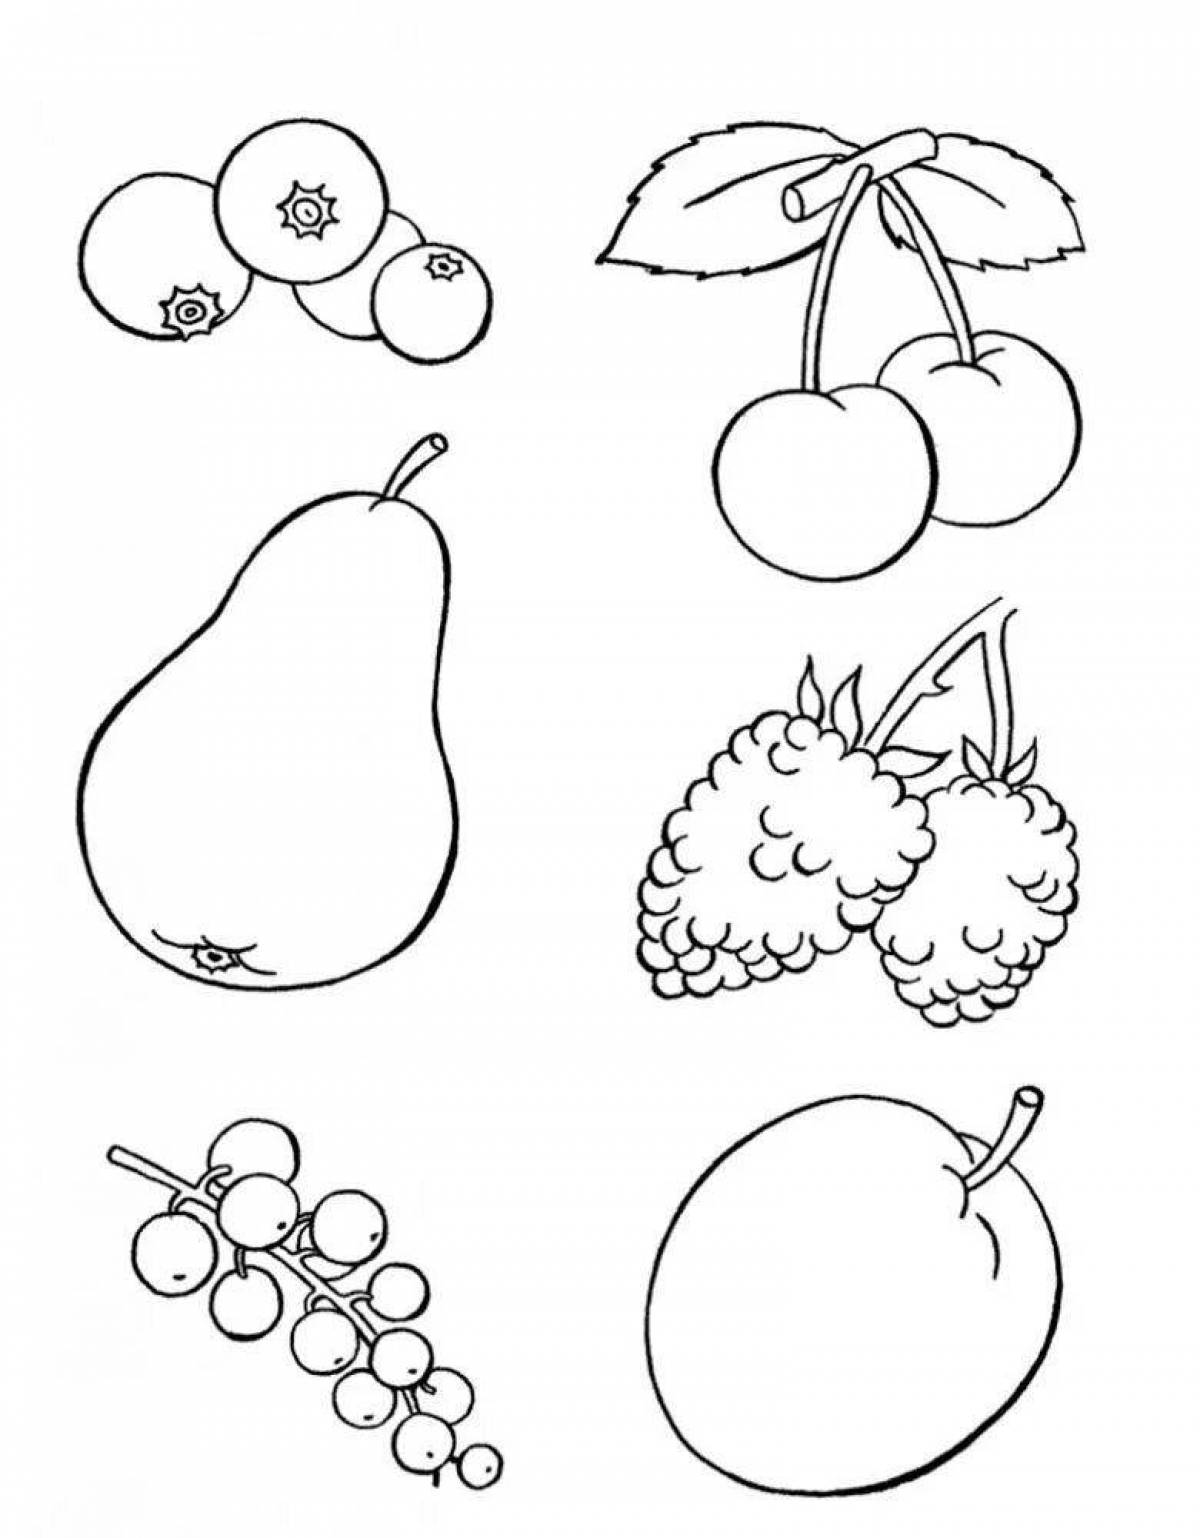 Adventurous coloring of fruits and vegetables